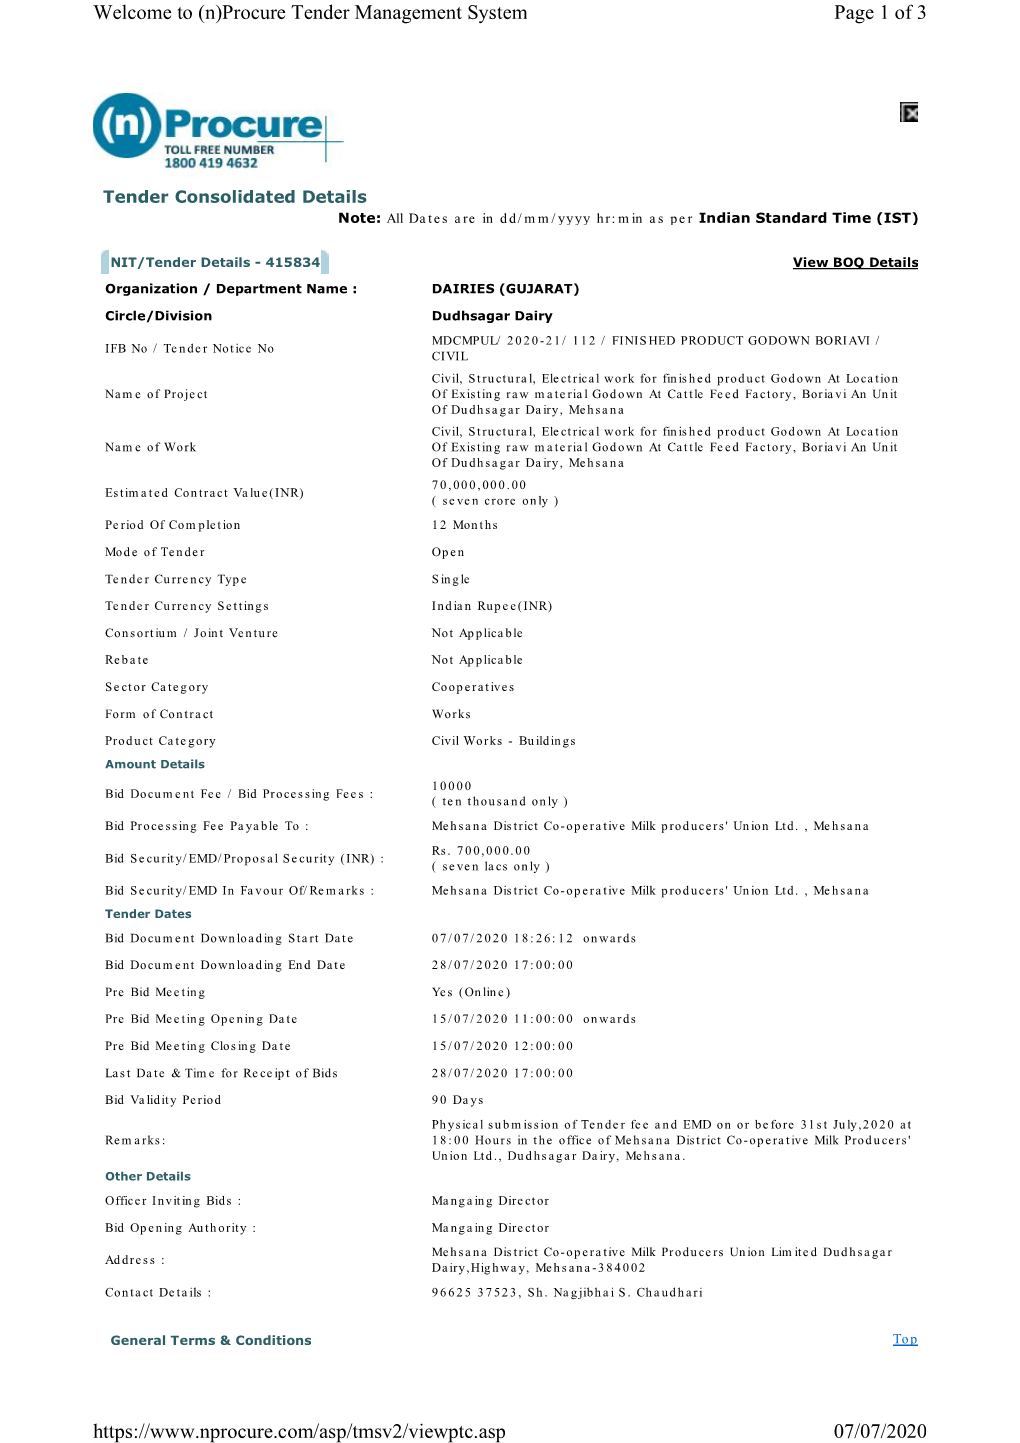 Page 1 of 3 Welcome to (N)Procure Tender Management System 07/07